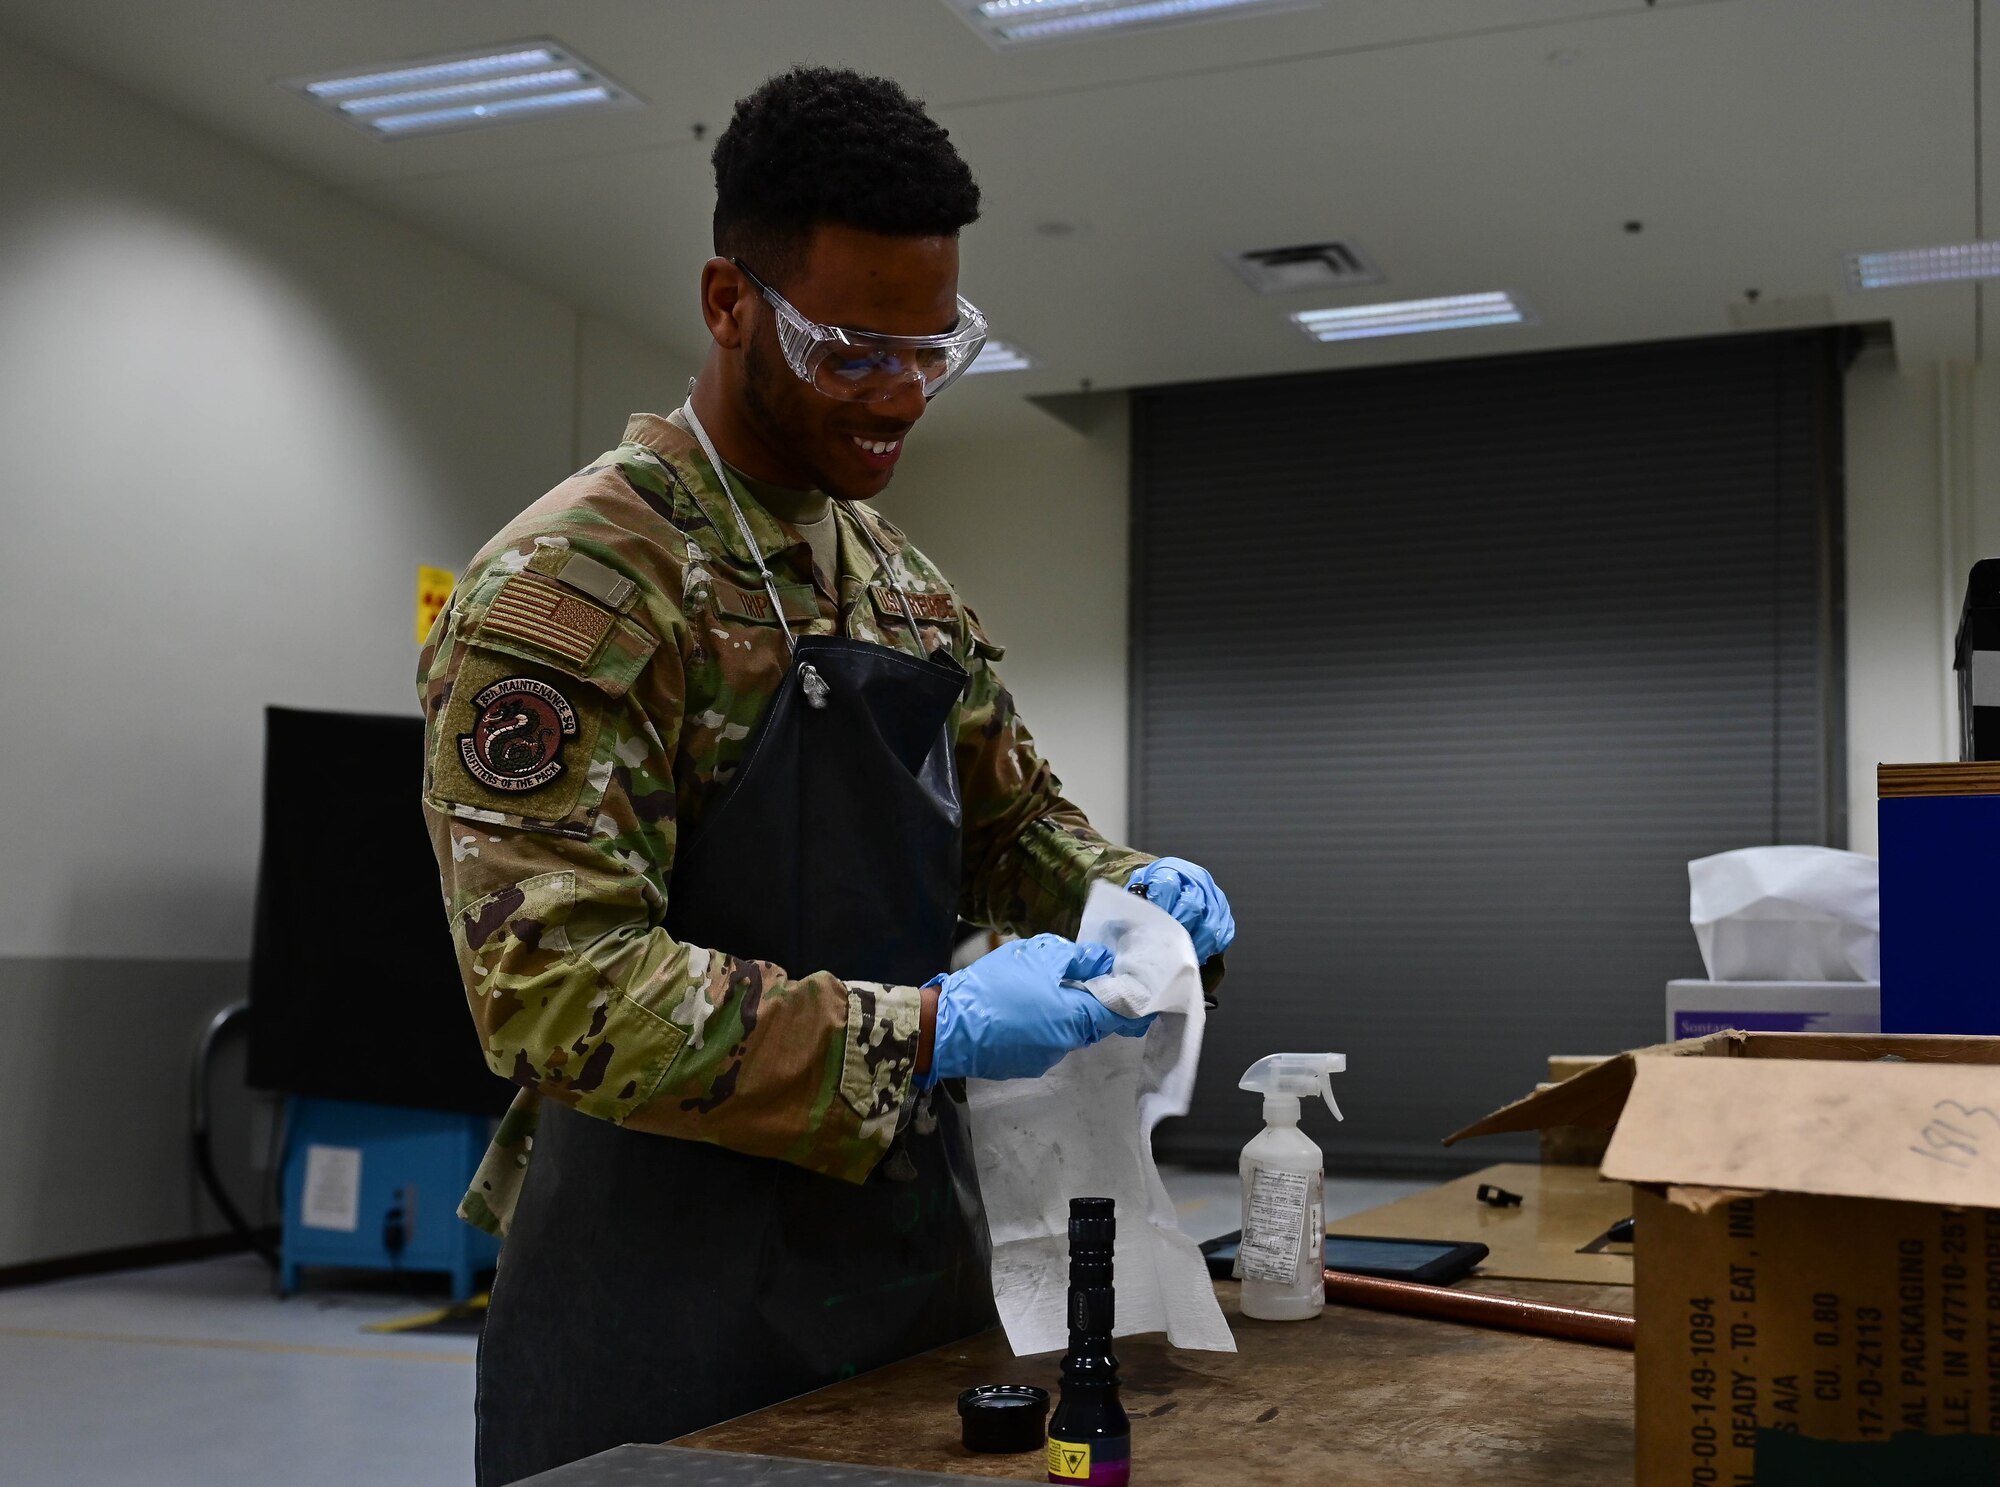 Airman 1st Class Jaylin Tripp, 8th Maintenance Squadron nondestructive inspection specialist, cleans a piece of aircraft equipment after testing at Kunsan Air Base, Republic of Korea, Mar. 6, 2023.